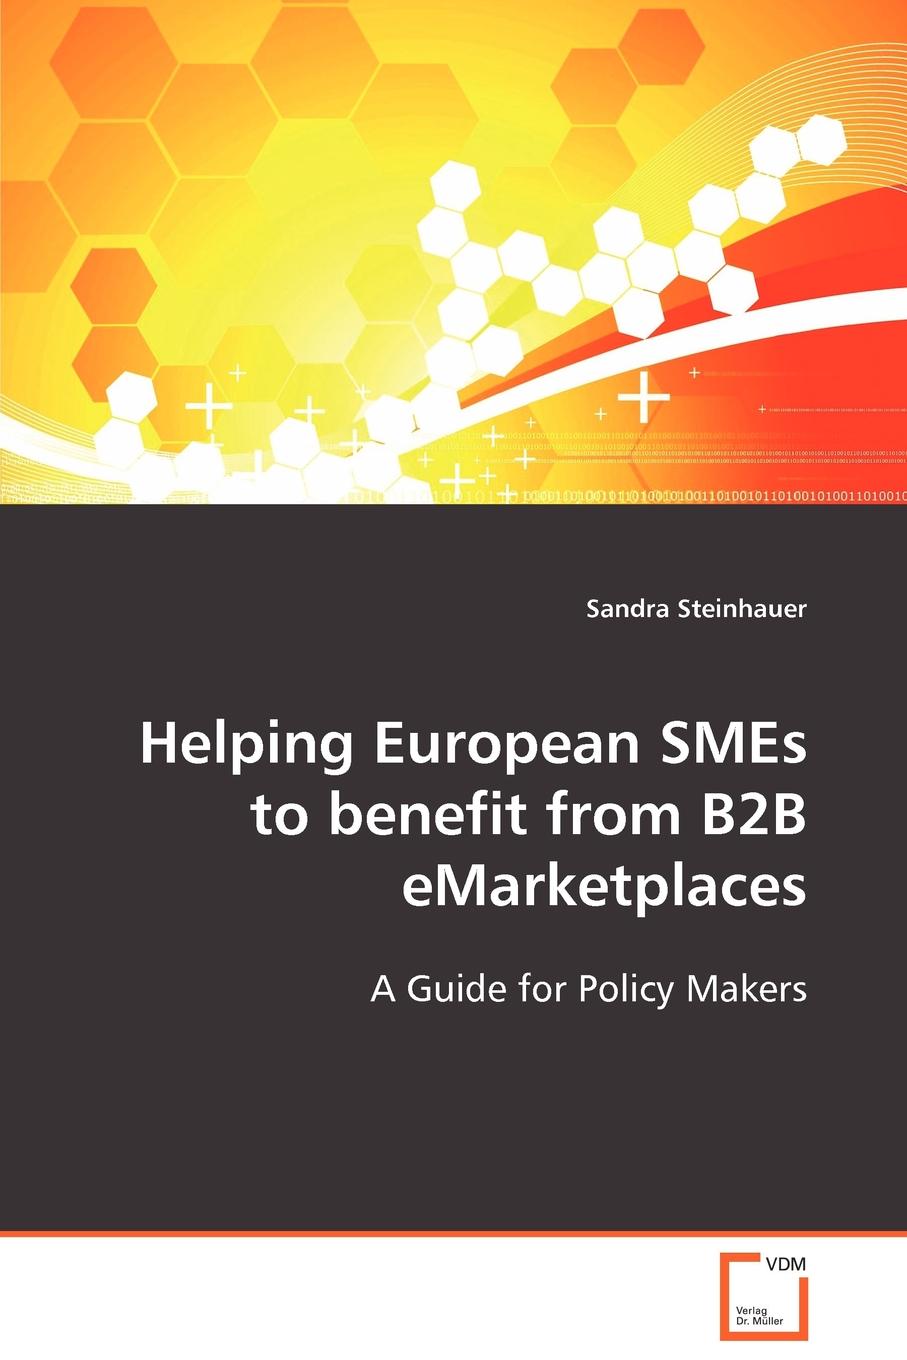 Helping European SMEs to benefit from B2B eMarketplaces